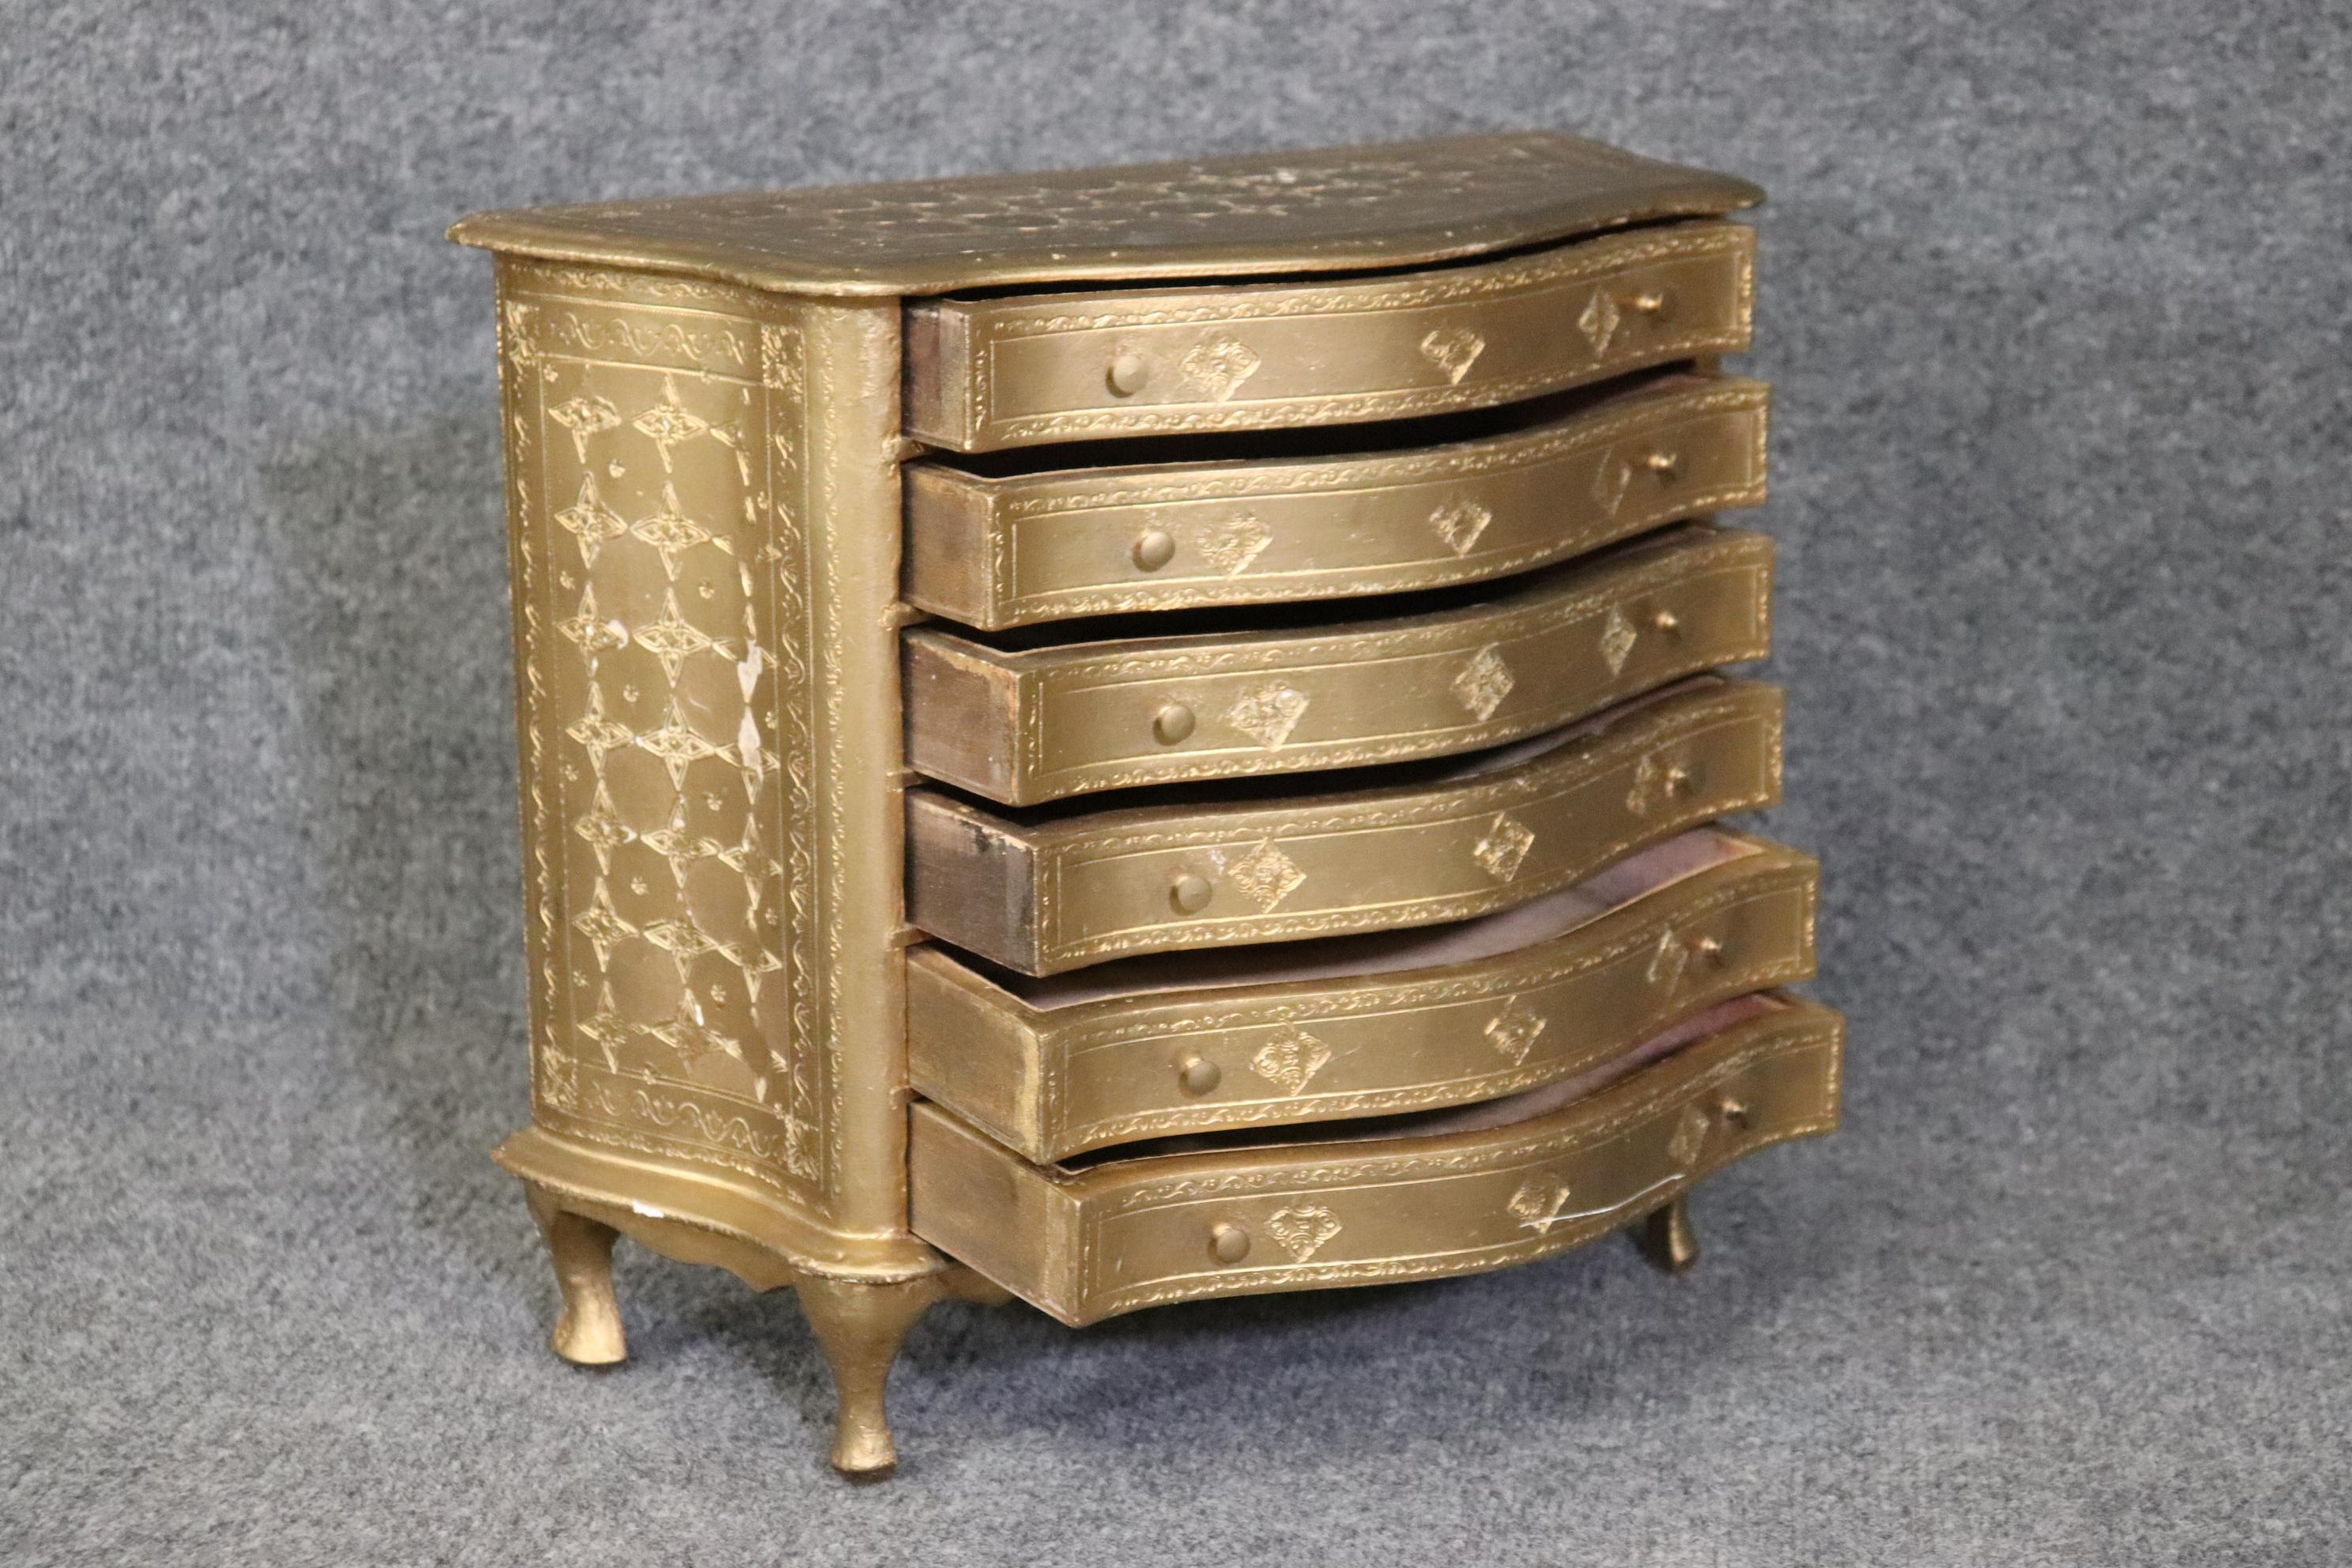 20th Century Gold Gilt Antique Italian Florentine Six Drawer Jewelry Box Signed Made in Italy